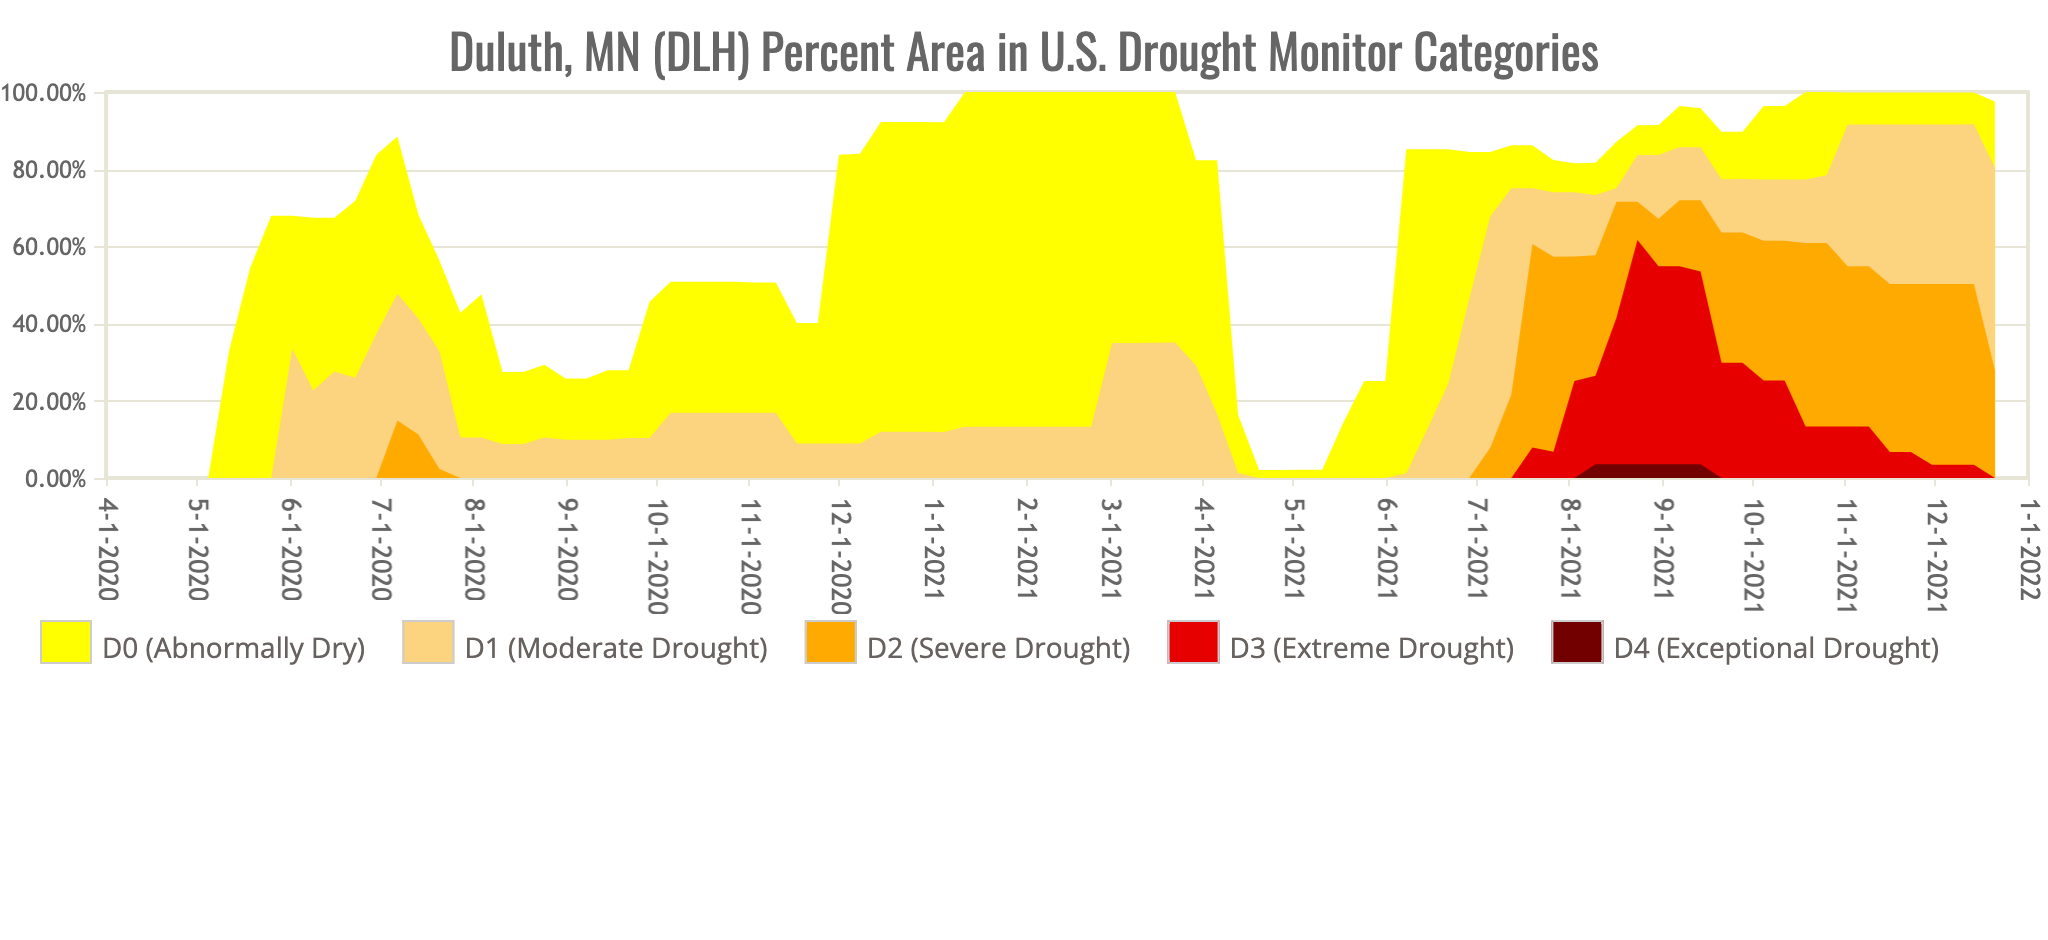 A timeline on the coverage of drought categories across northeast Minnesota and northwest Wisconsin.